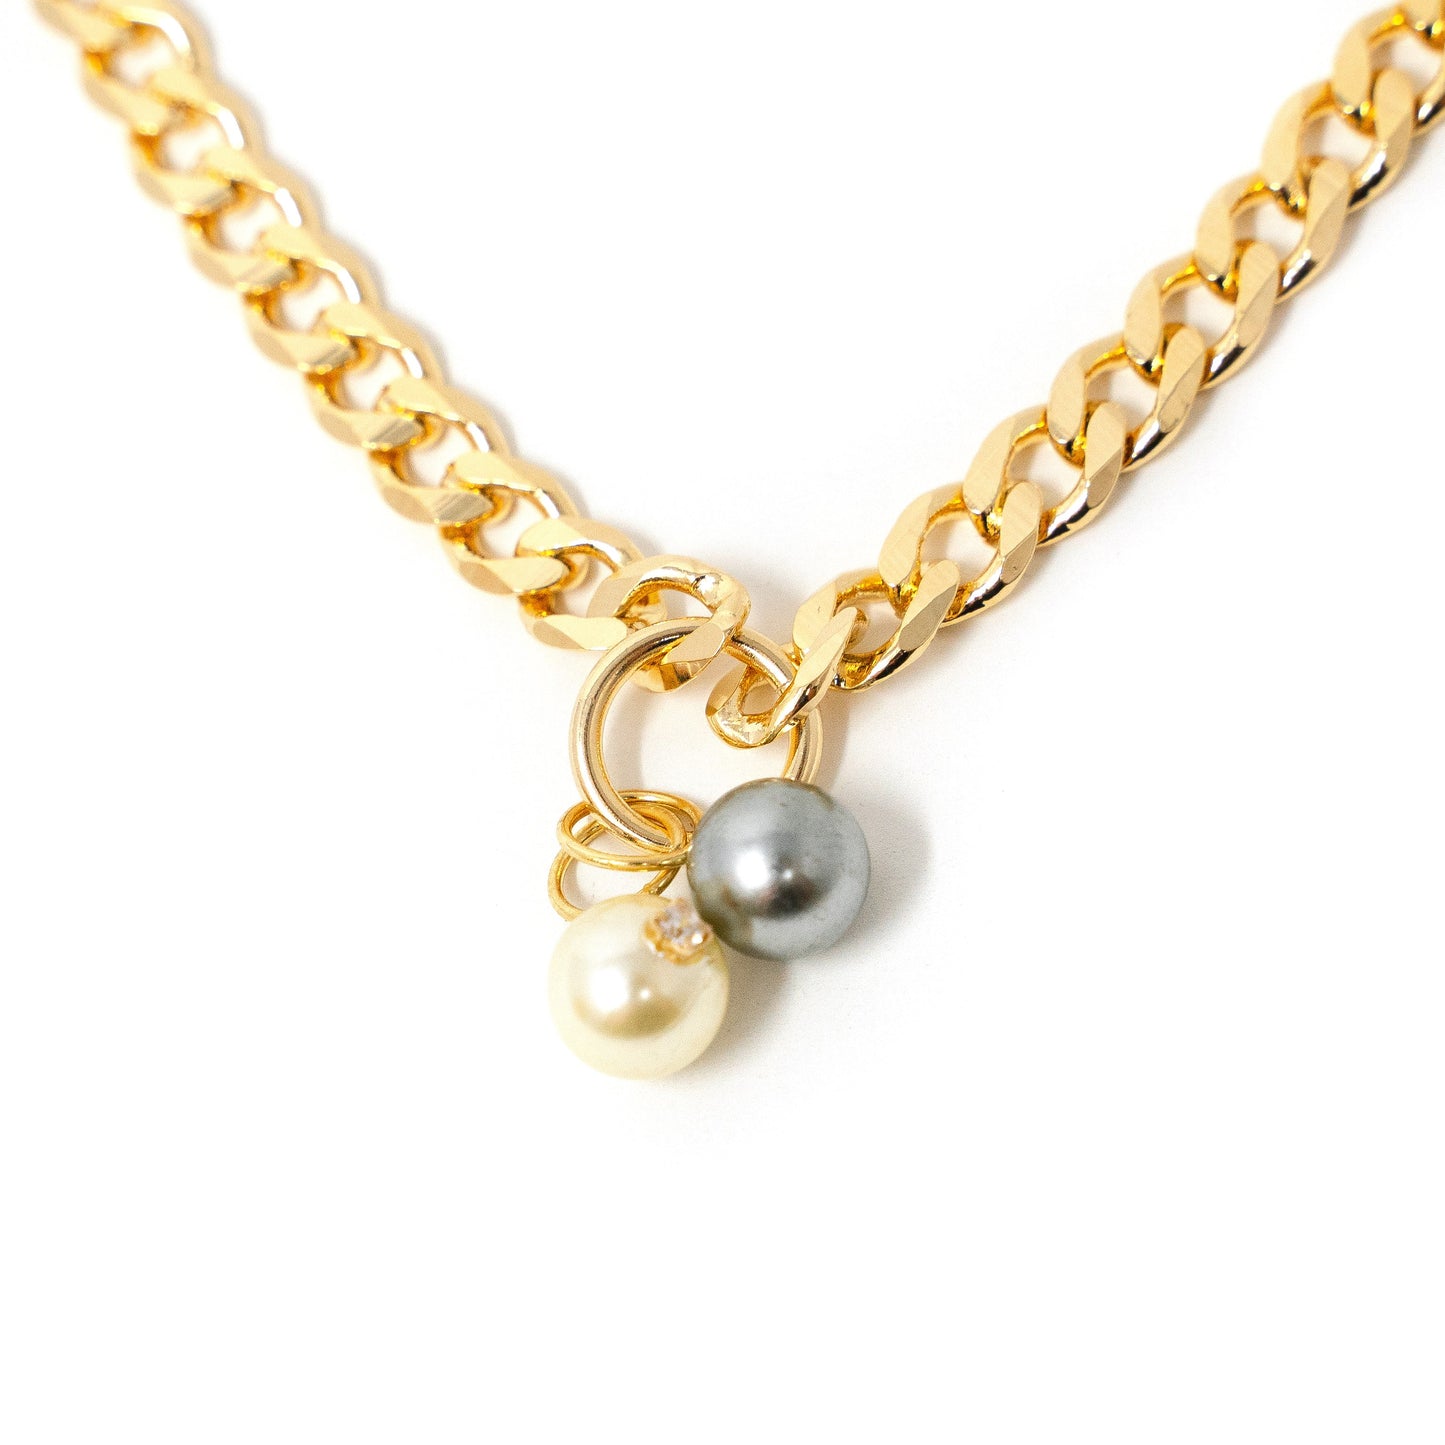 Cuban Chain Link Charm Necklaces JEWELRY The Sis Kiss Pearls